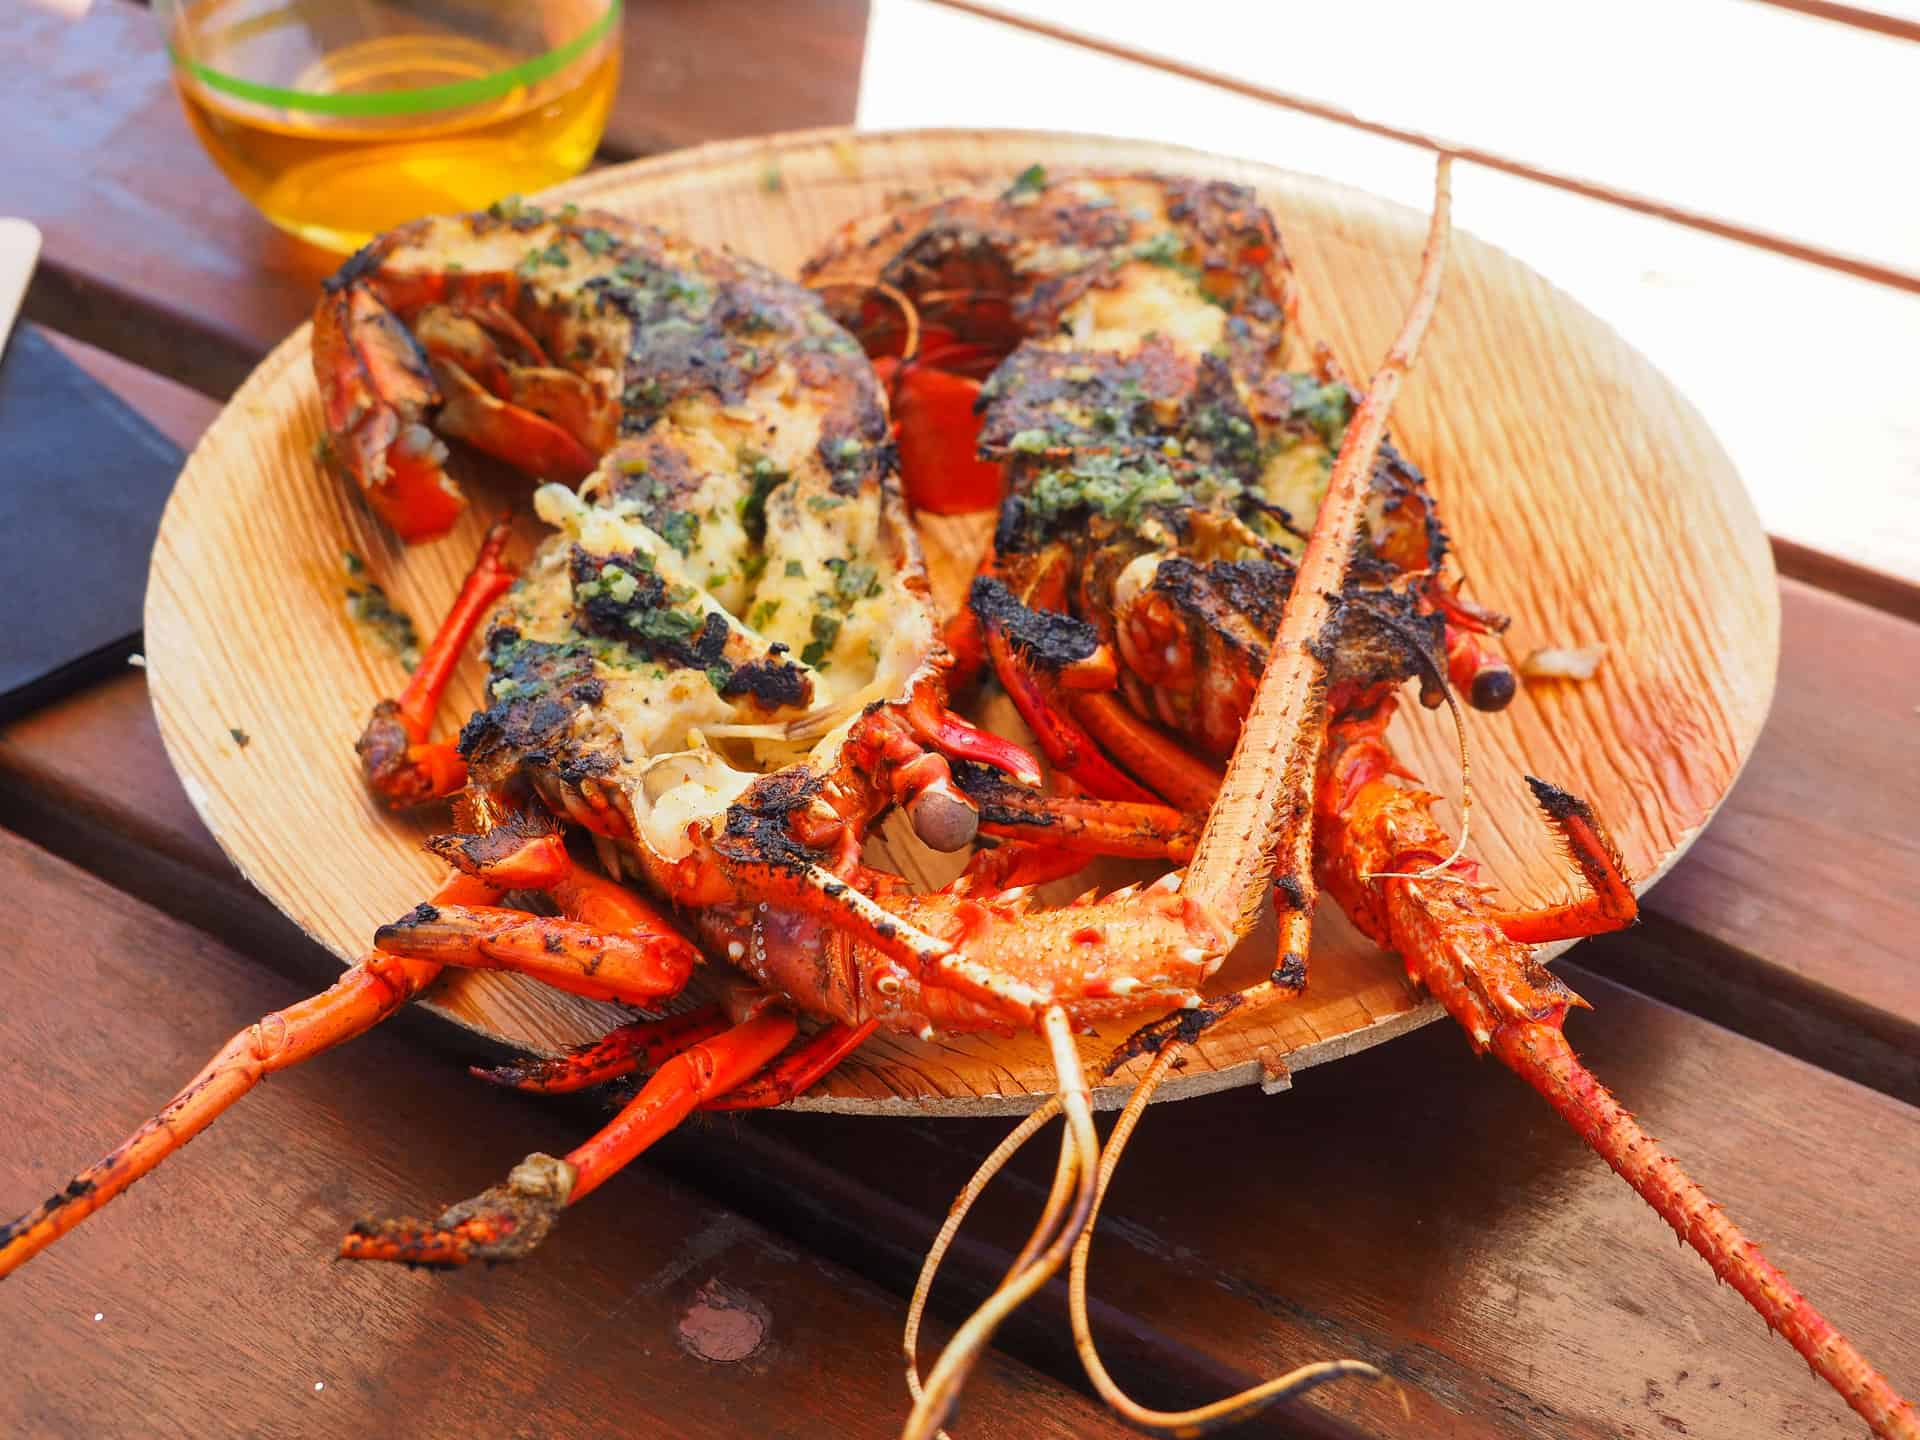 A plate of BBQ crayfish from the Shore Leave Festival in Geraldton